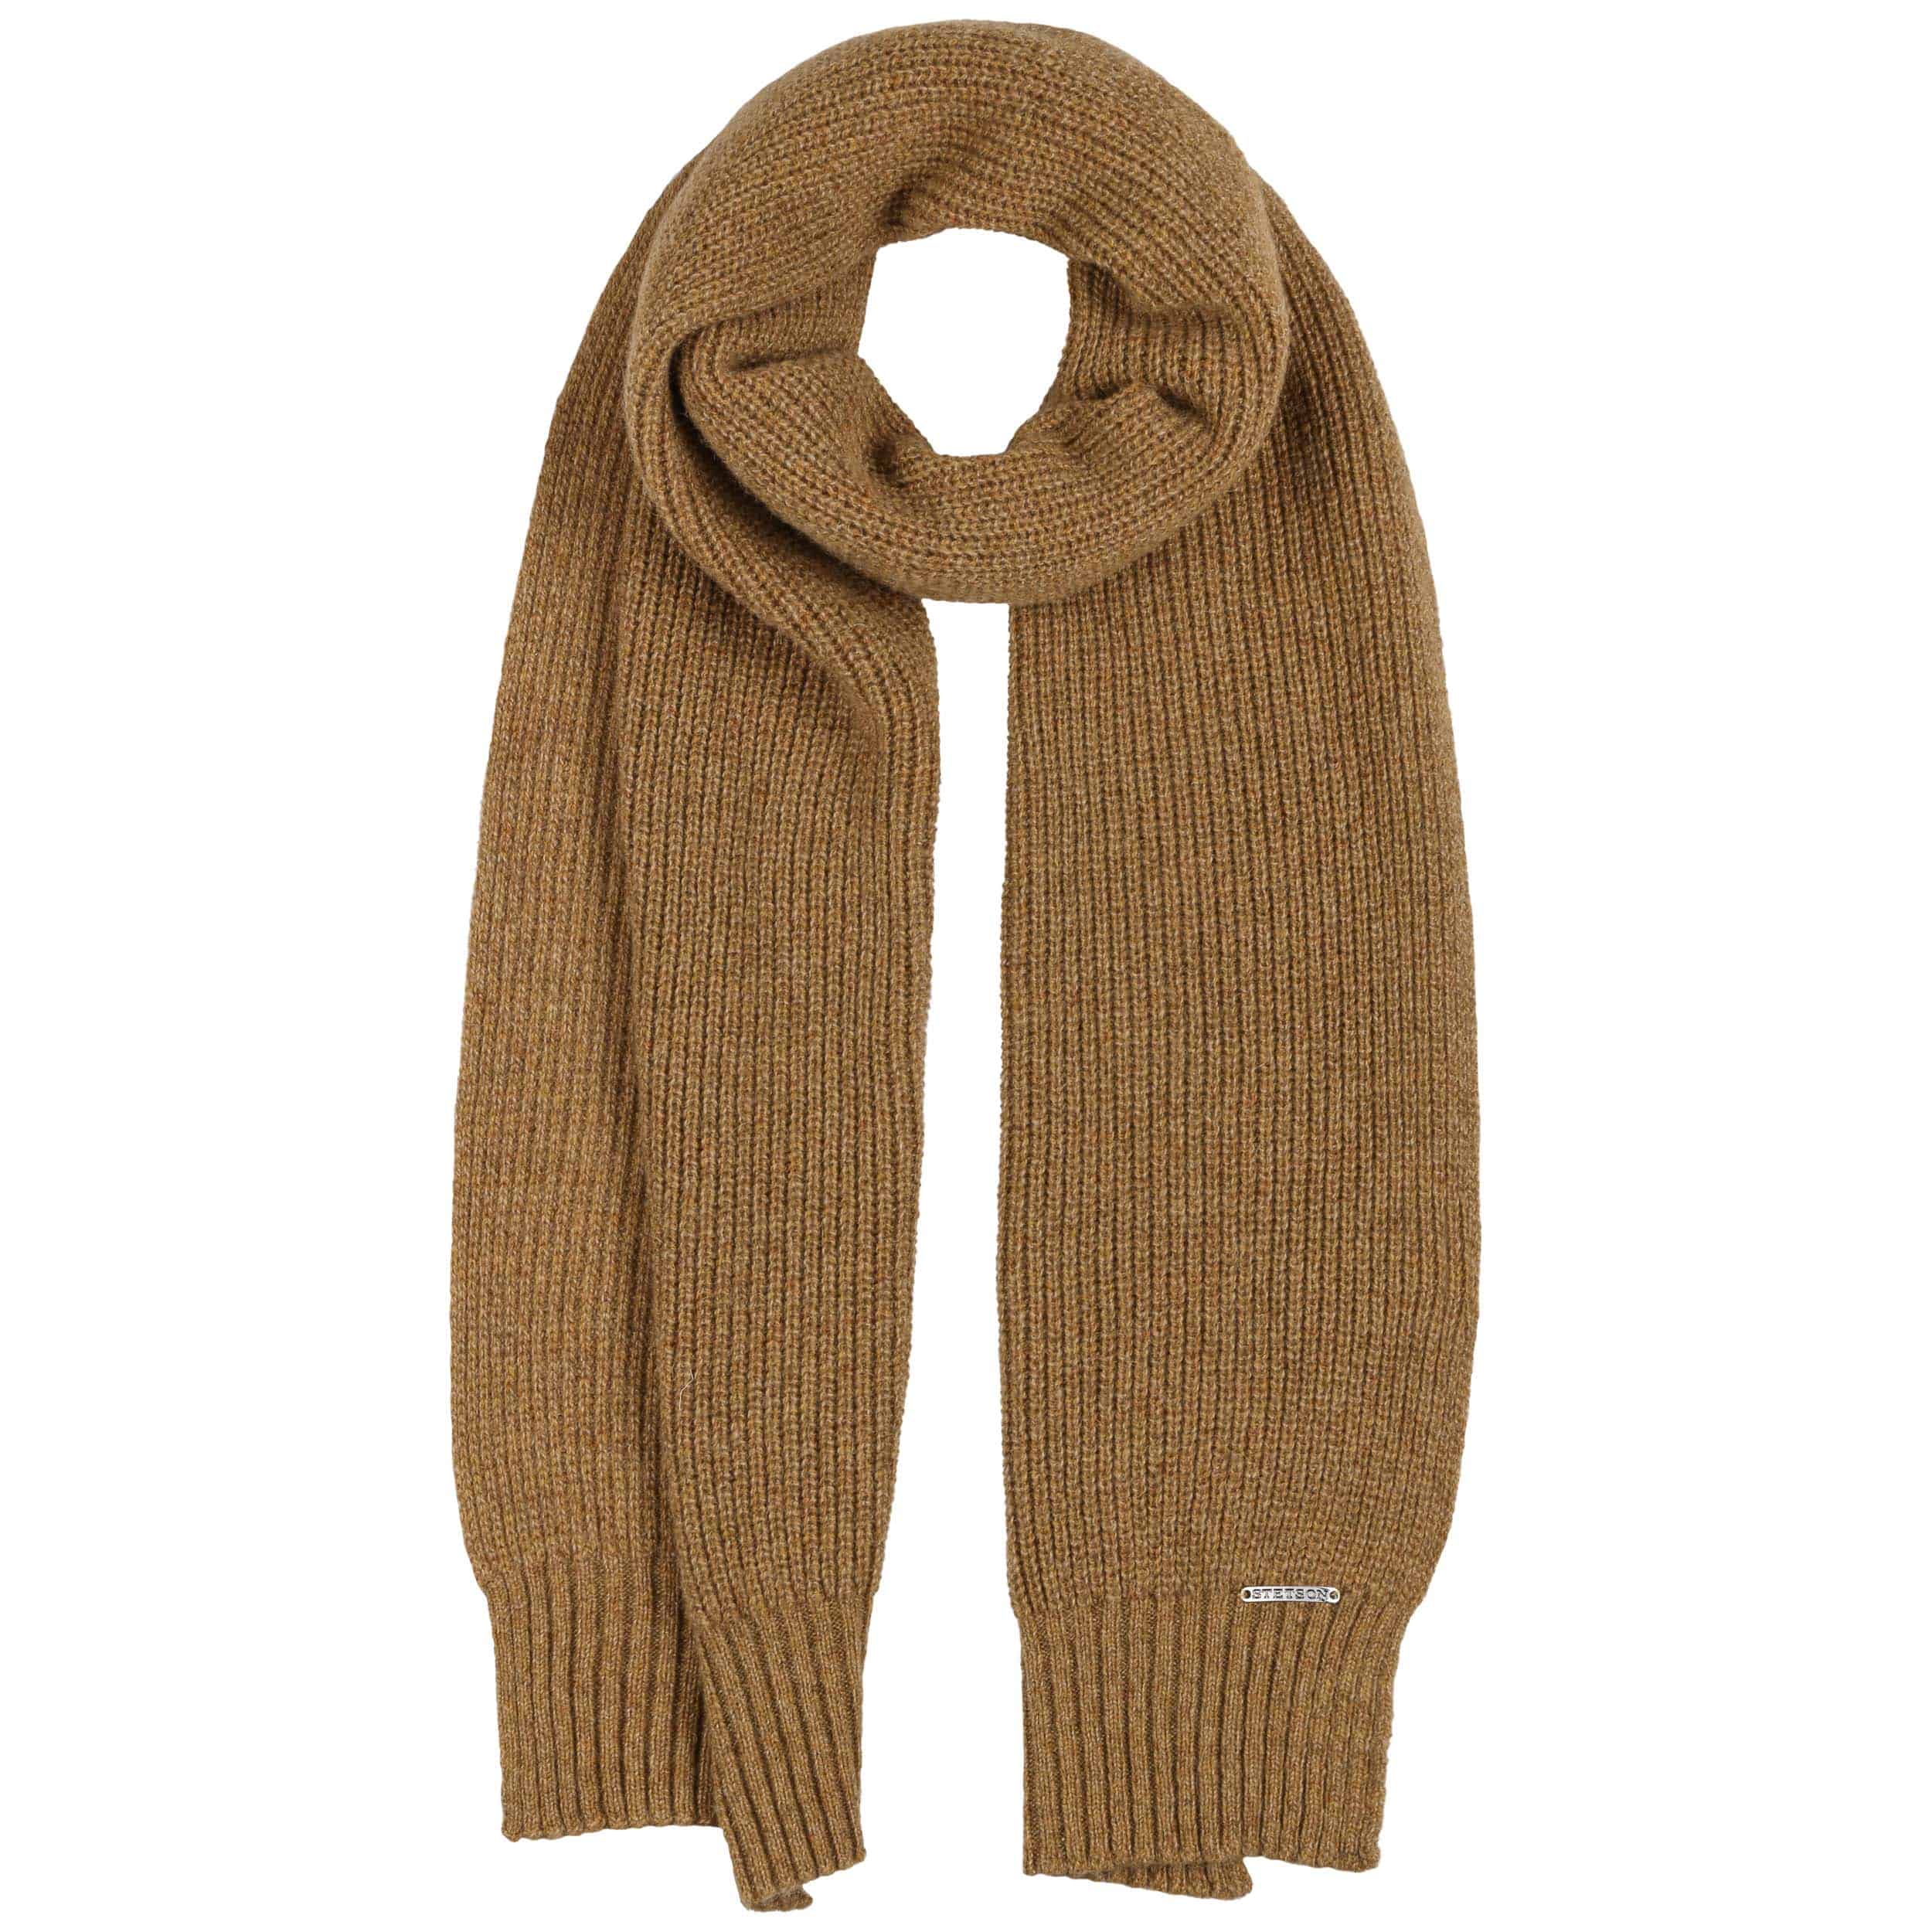 Camel´s Wool Scarf by Stetson - 149,00